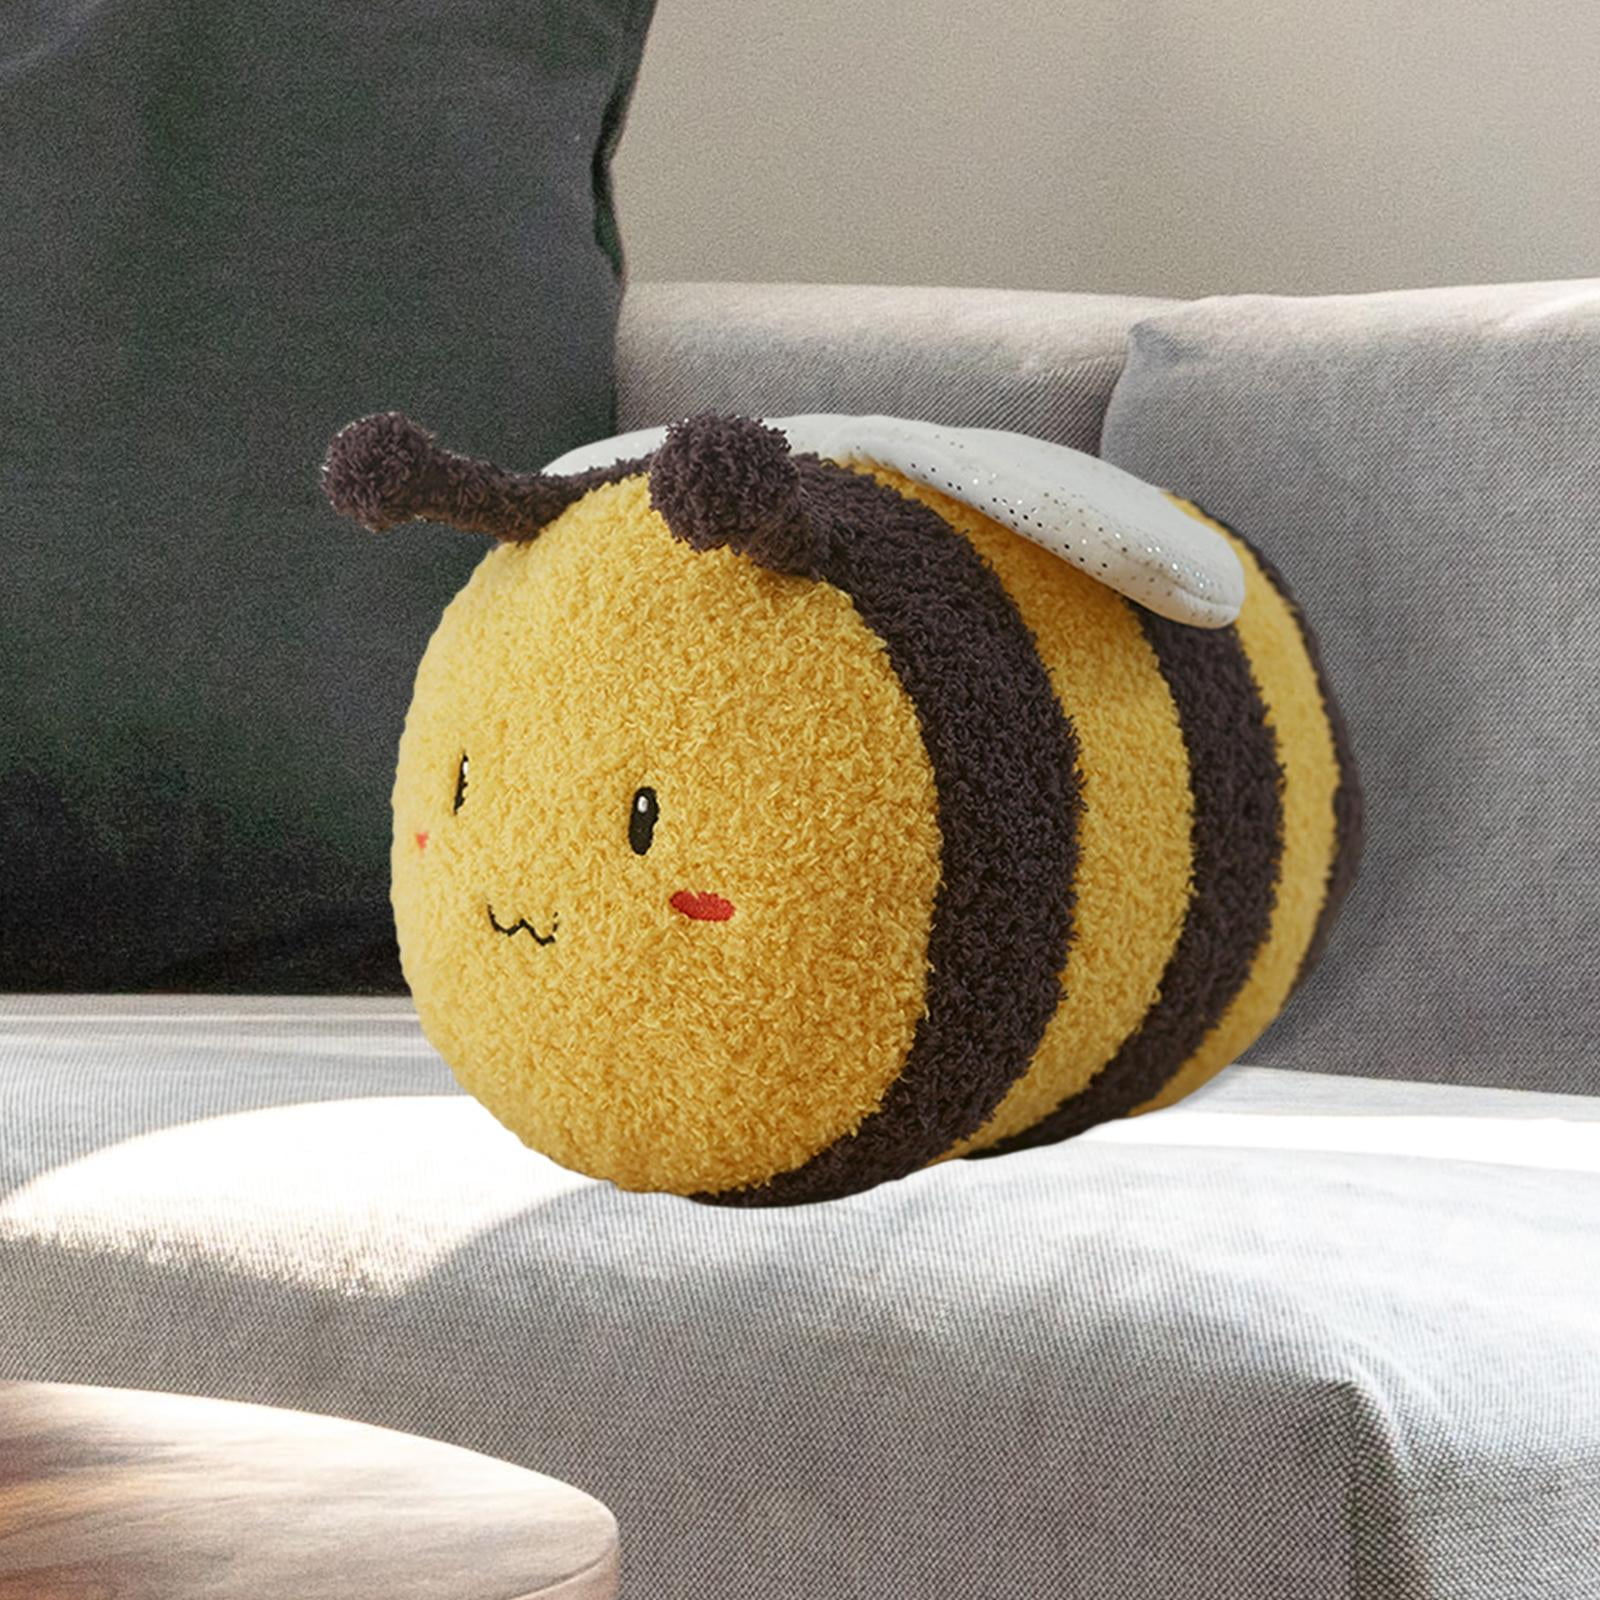 Onsoyours Cute Bee Plush, Soft Stuffed Animal Honey Bee Plush Toy Pillow  for Kids (Yellow, 13)